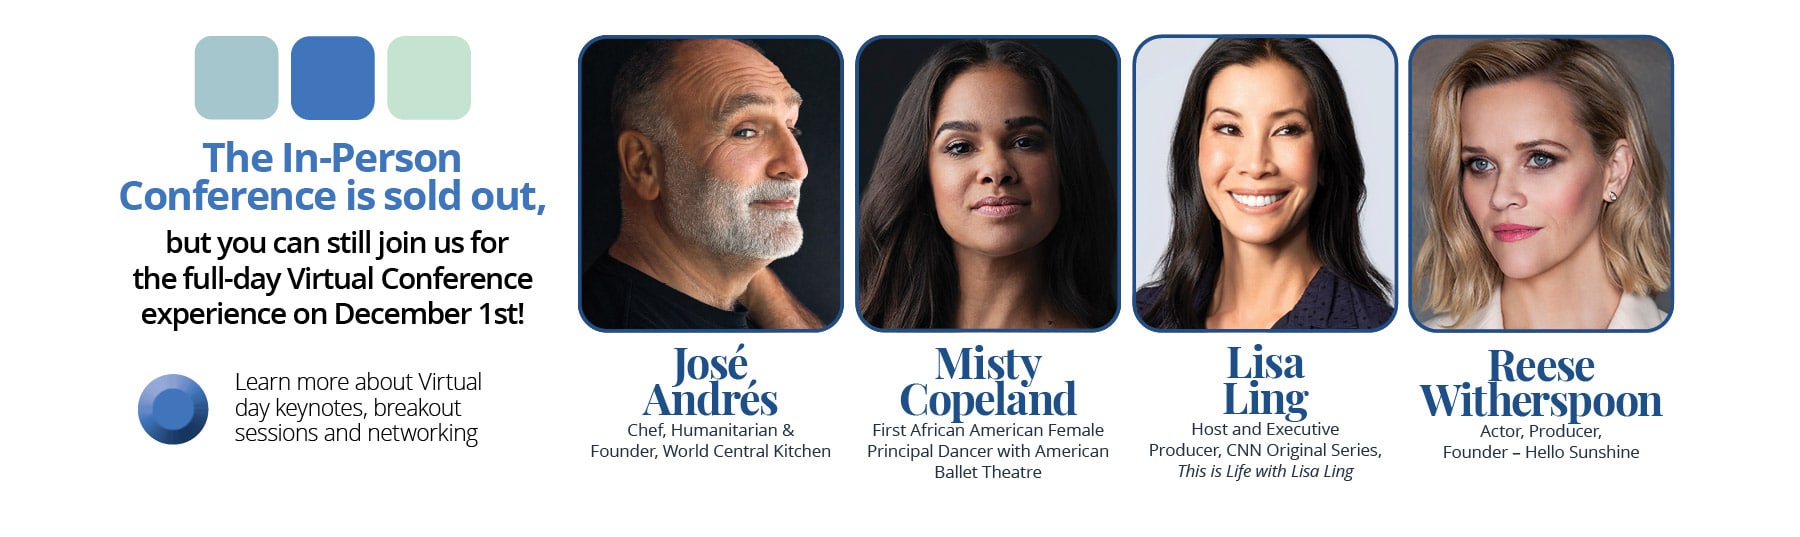 MA In-Person Conference is sold out, but you can join us for our Virtual Conference with José Andrés, Misty Copeland, Lisa Ling, and Reese Witherspoon